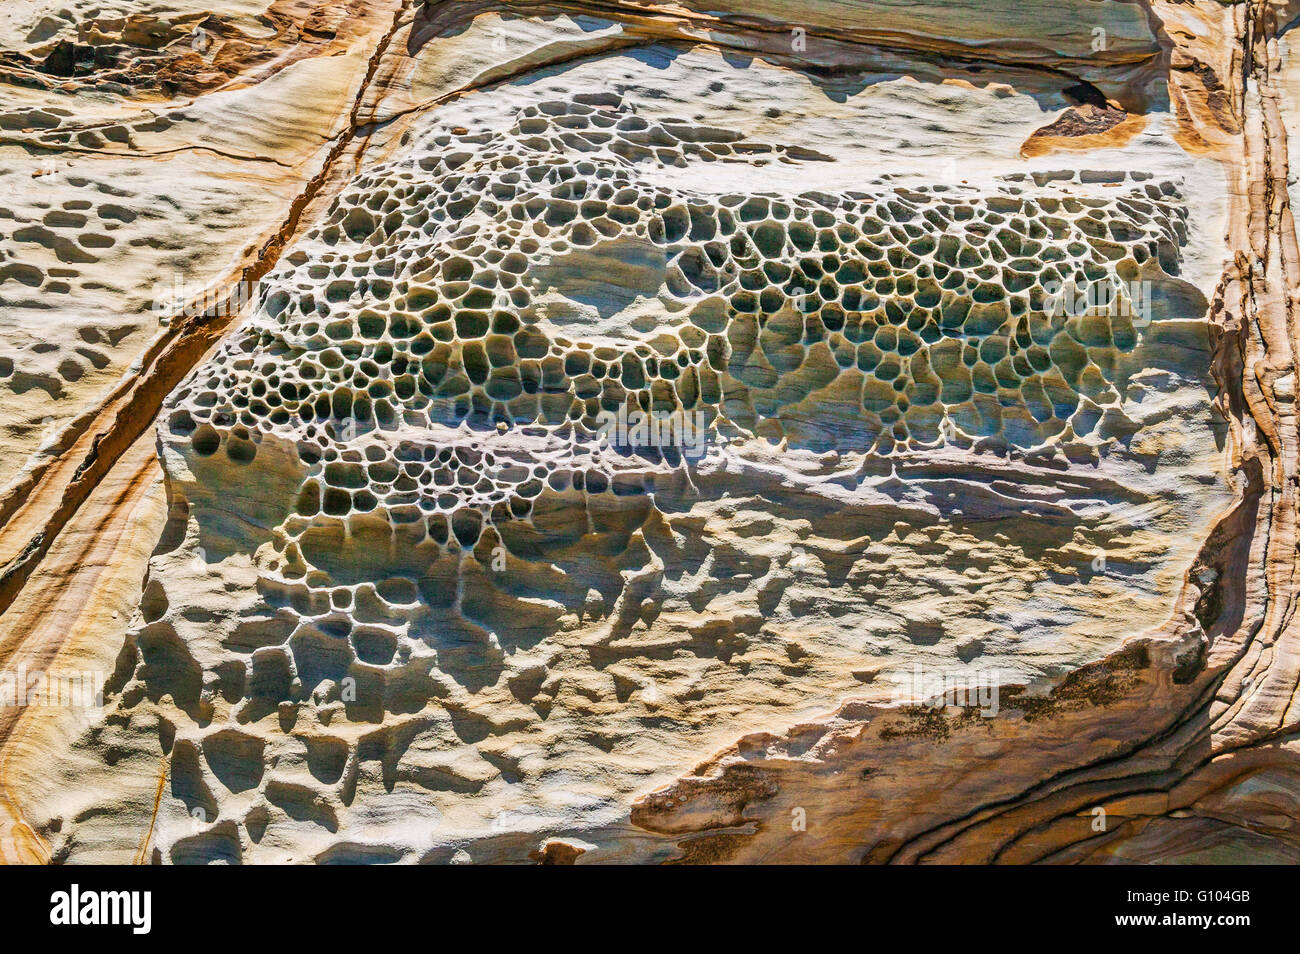 Australia, New South Wales, Central Coast, Bouddi National Park, erosion has formed honeycomb patterns on Hawkesbury sandstone Stock Photo